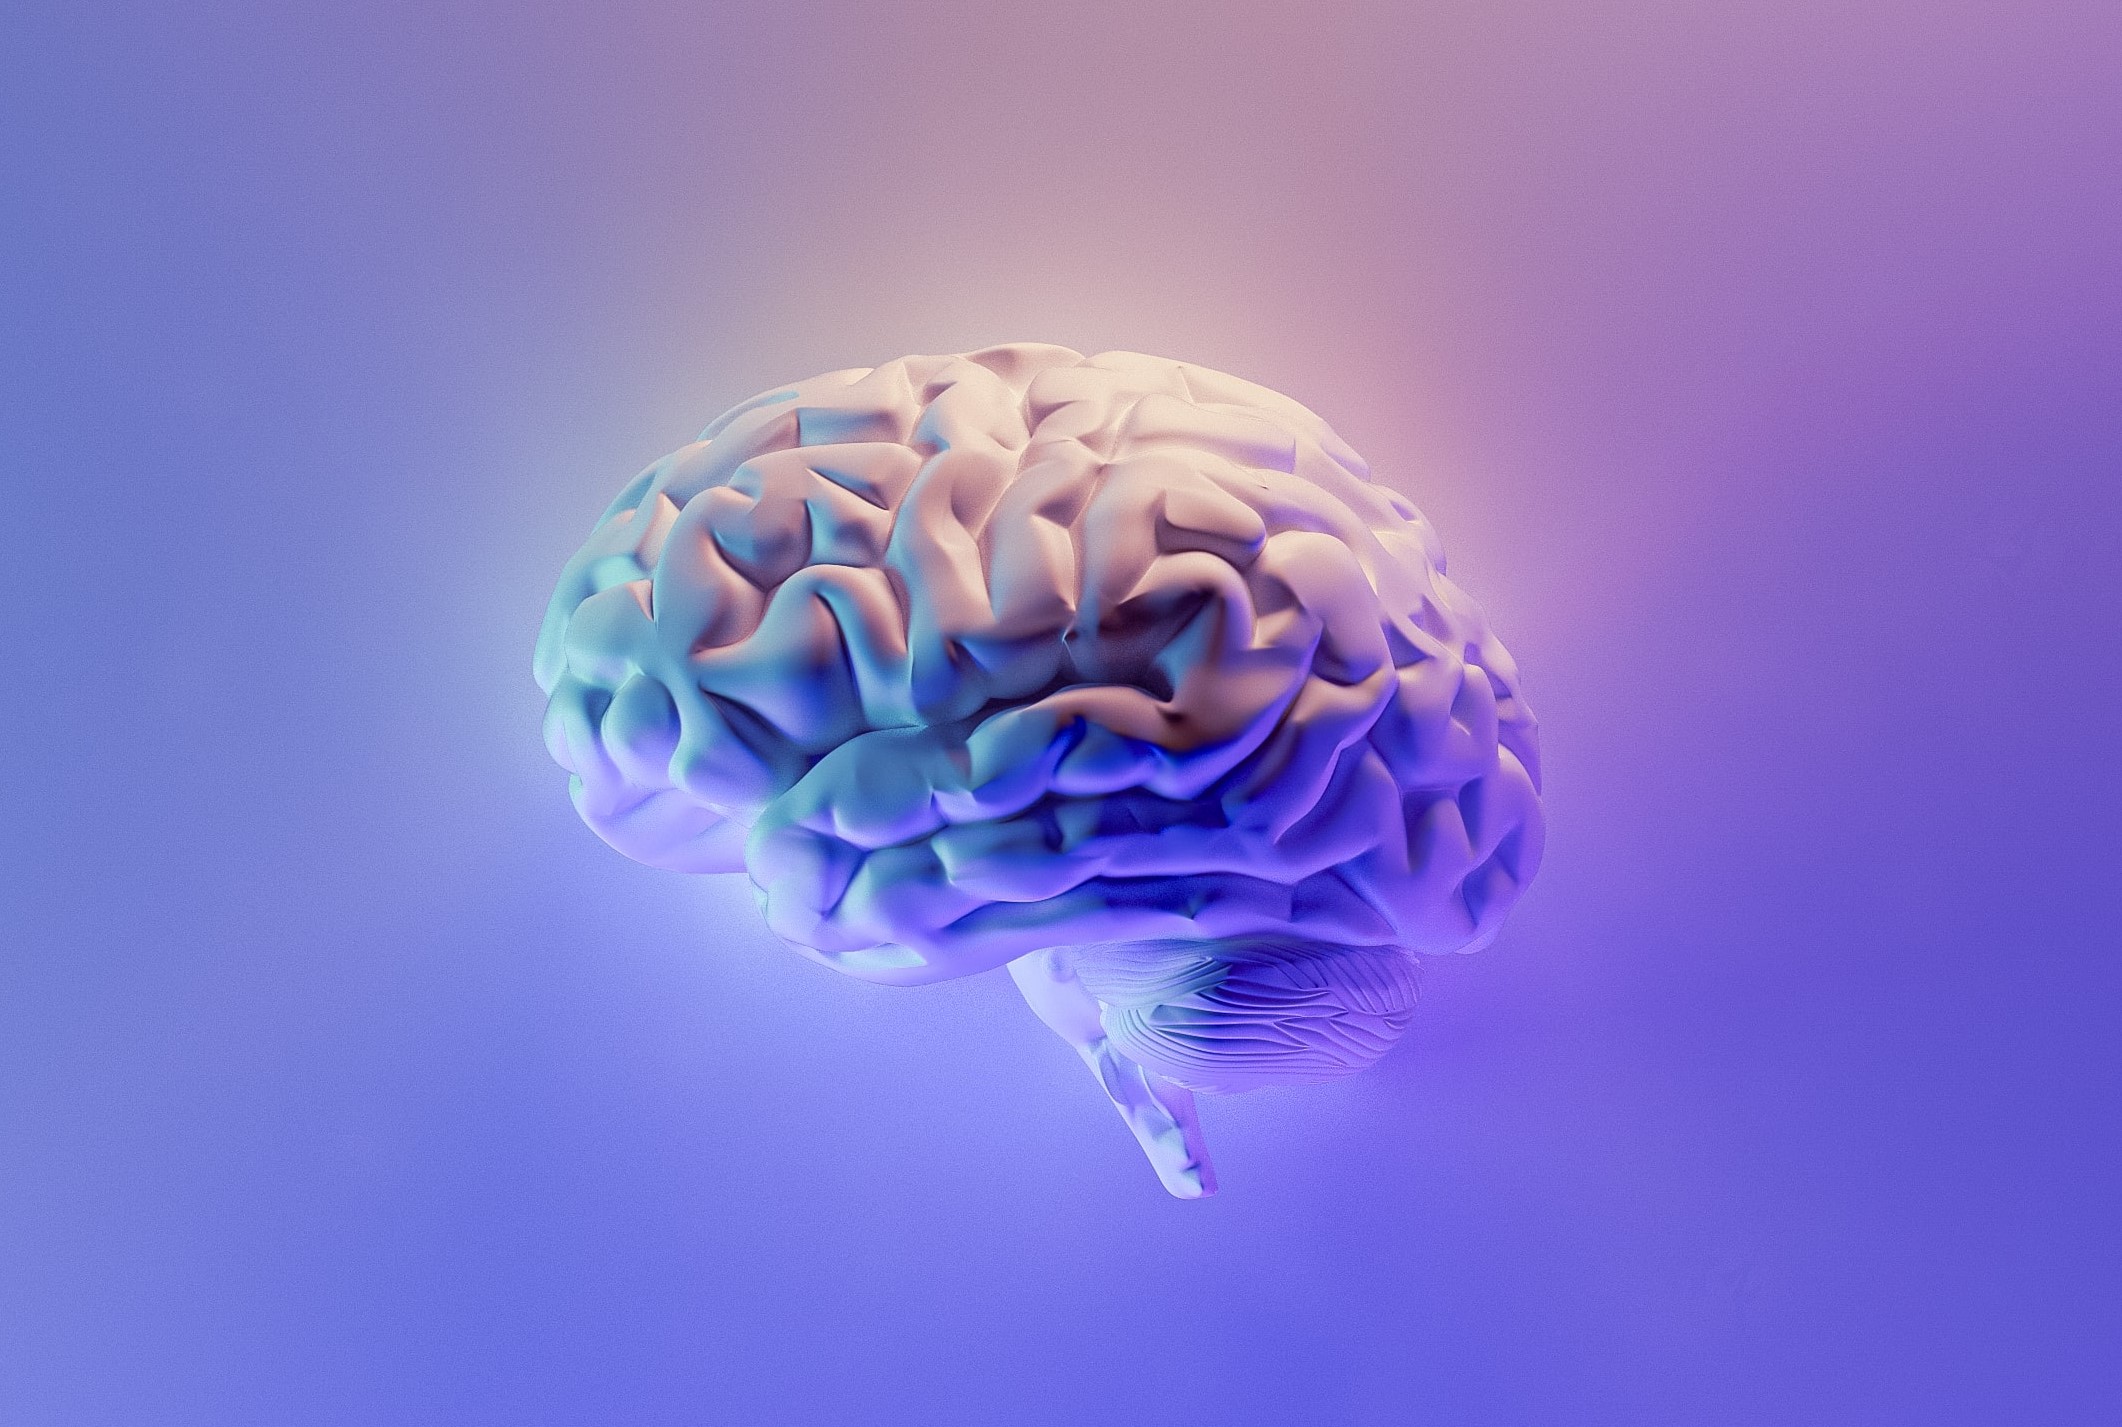 A 3D model of a brain lit up in purples and soft gold